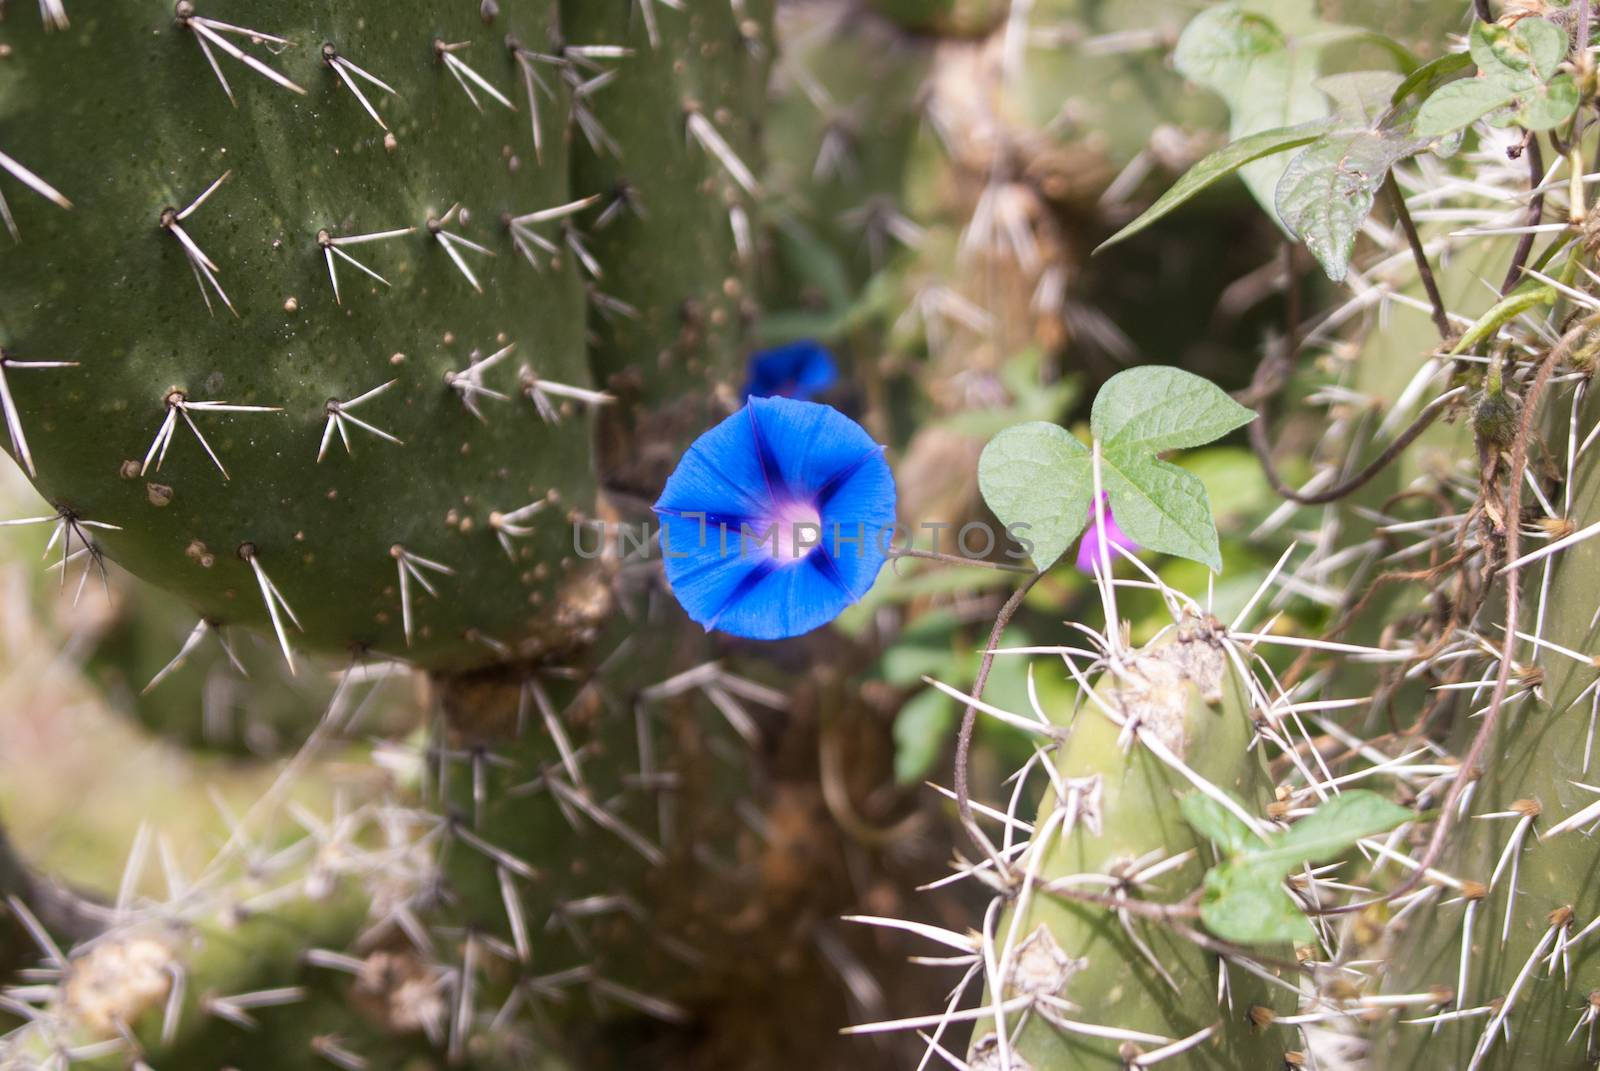 Blue flower in the thorny cactus by emattil